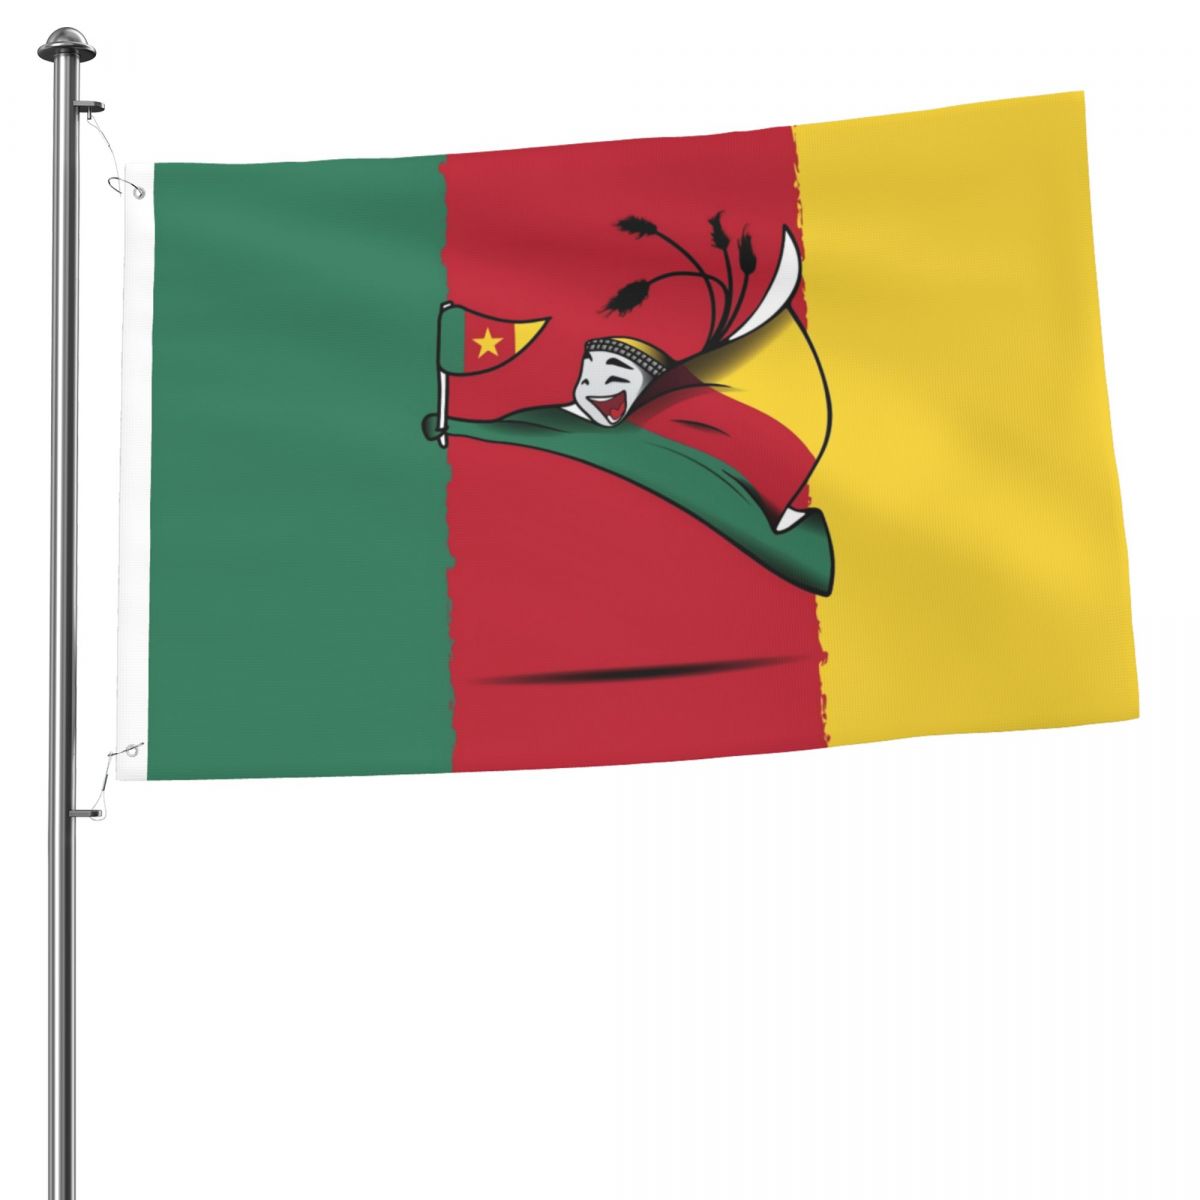 Cameroon World Cup 2022 Mascot 2x3 FT UV Resistant Flag